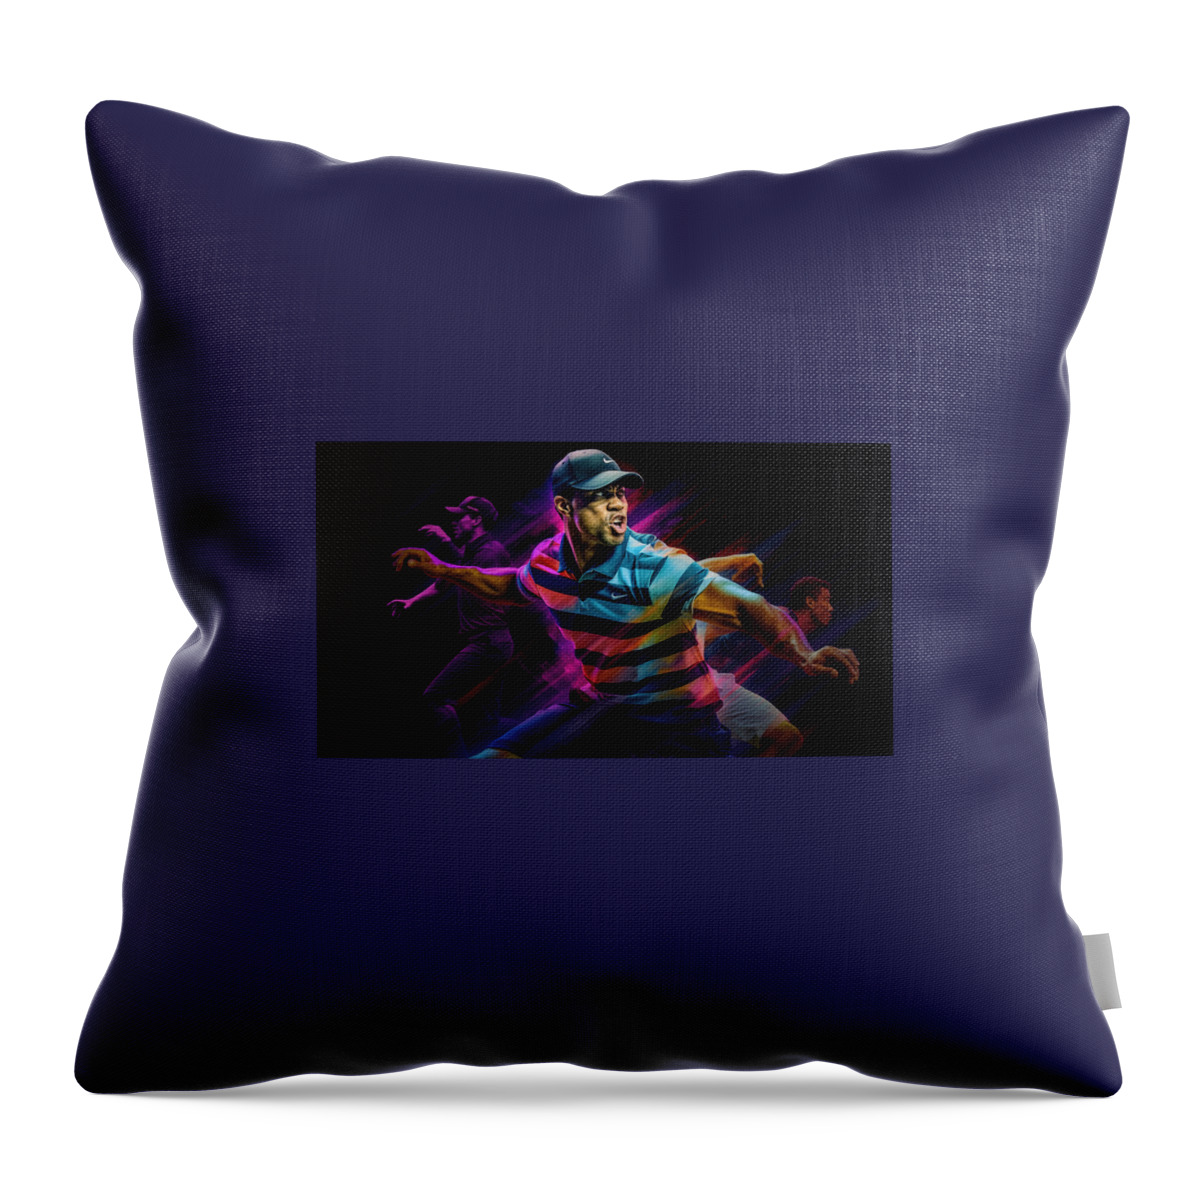 Maximalist Famous Sports Athletes Tiger Woods Art Throw Pillow featuring the painting Maximalist famous sports athletes tiger woods  by Asar Studios by Celestial Images